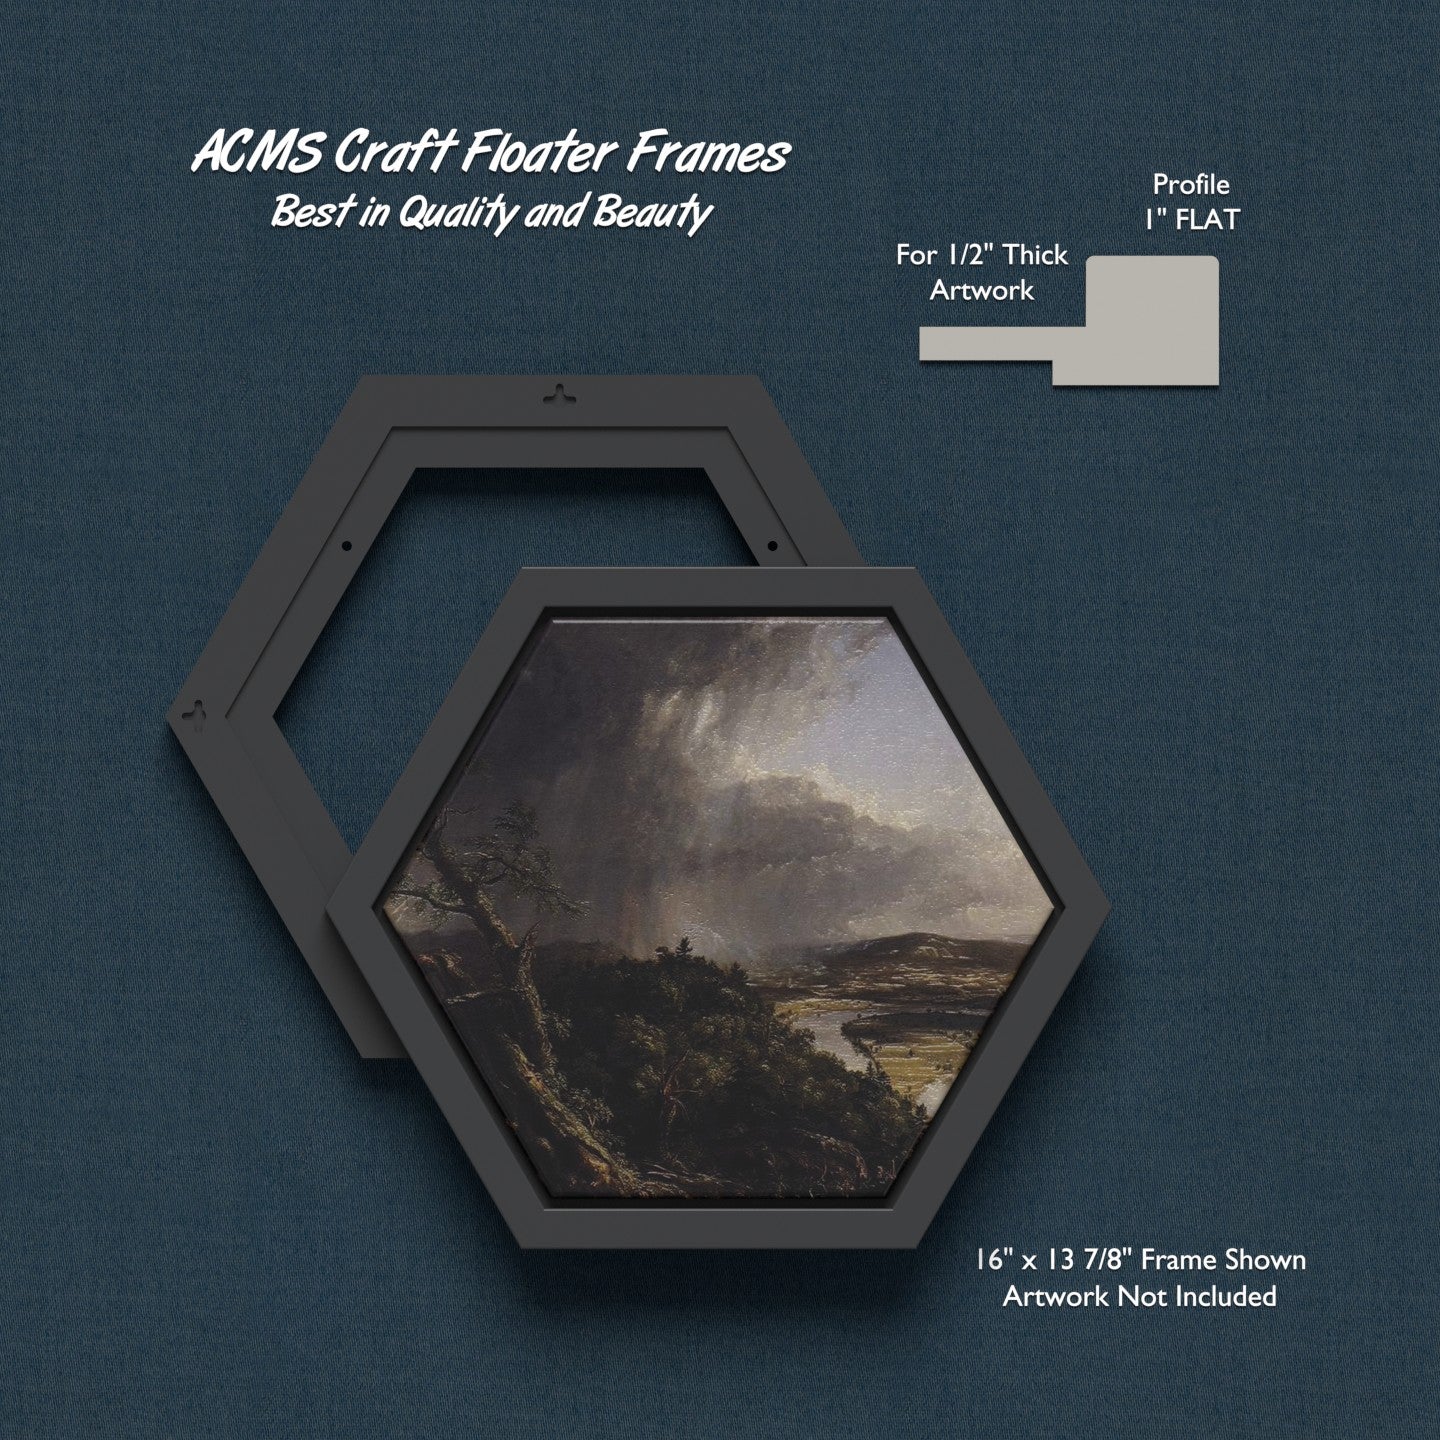 ACMS Hexagon Craft Floater Frame - For 1/2" Thick Artwork - Profile 1" FLAT